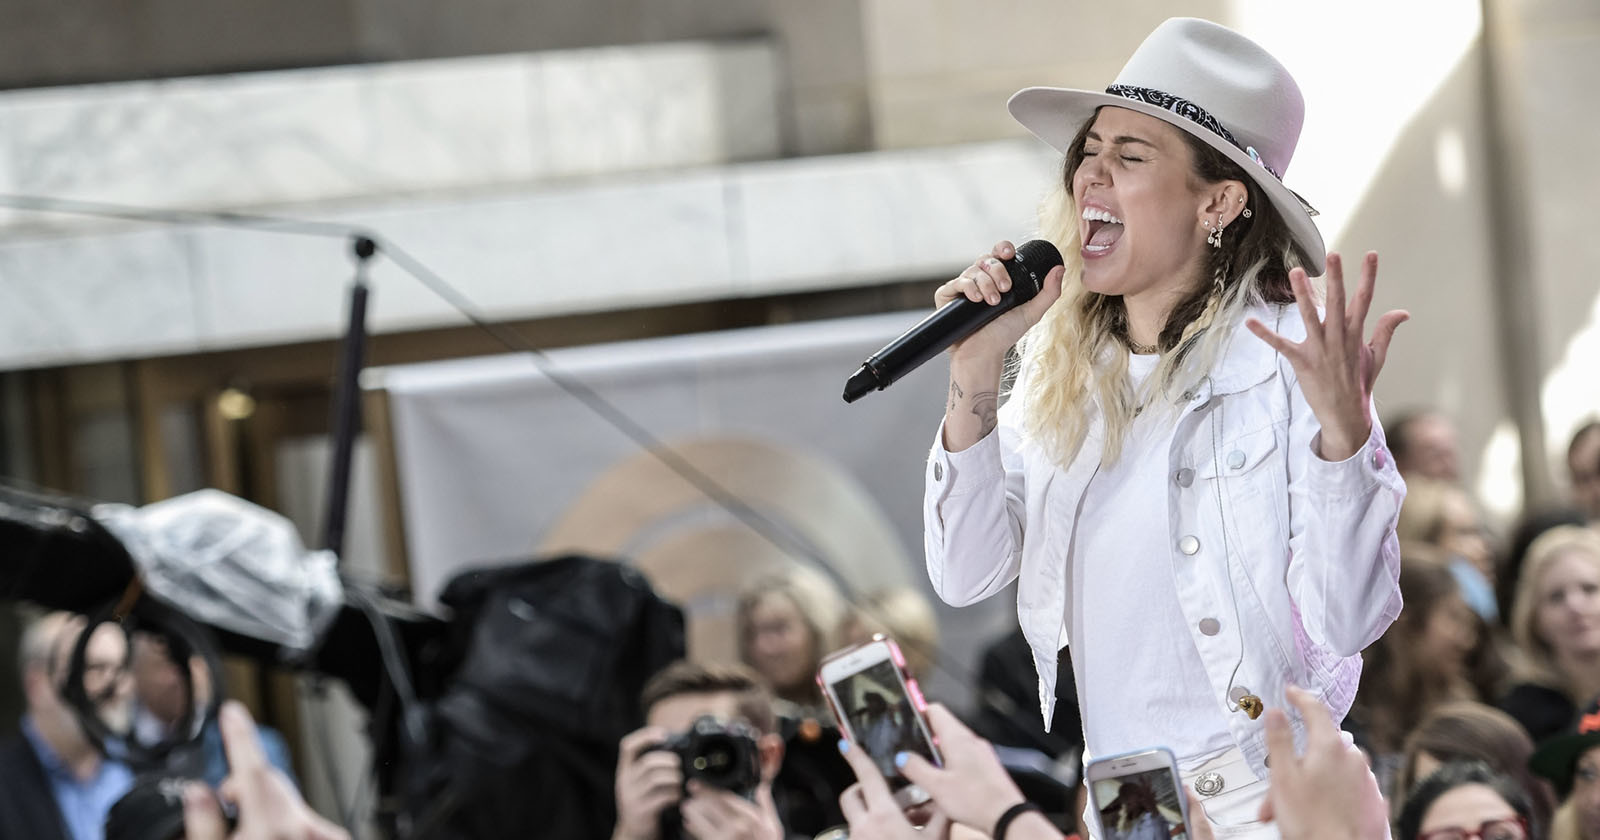 Miley Cyrus Sued by Paparazzi For Sharing Photo Without Permission